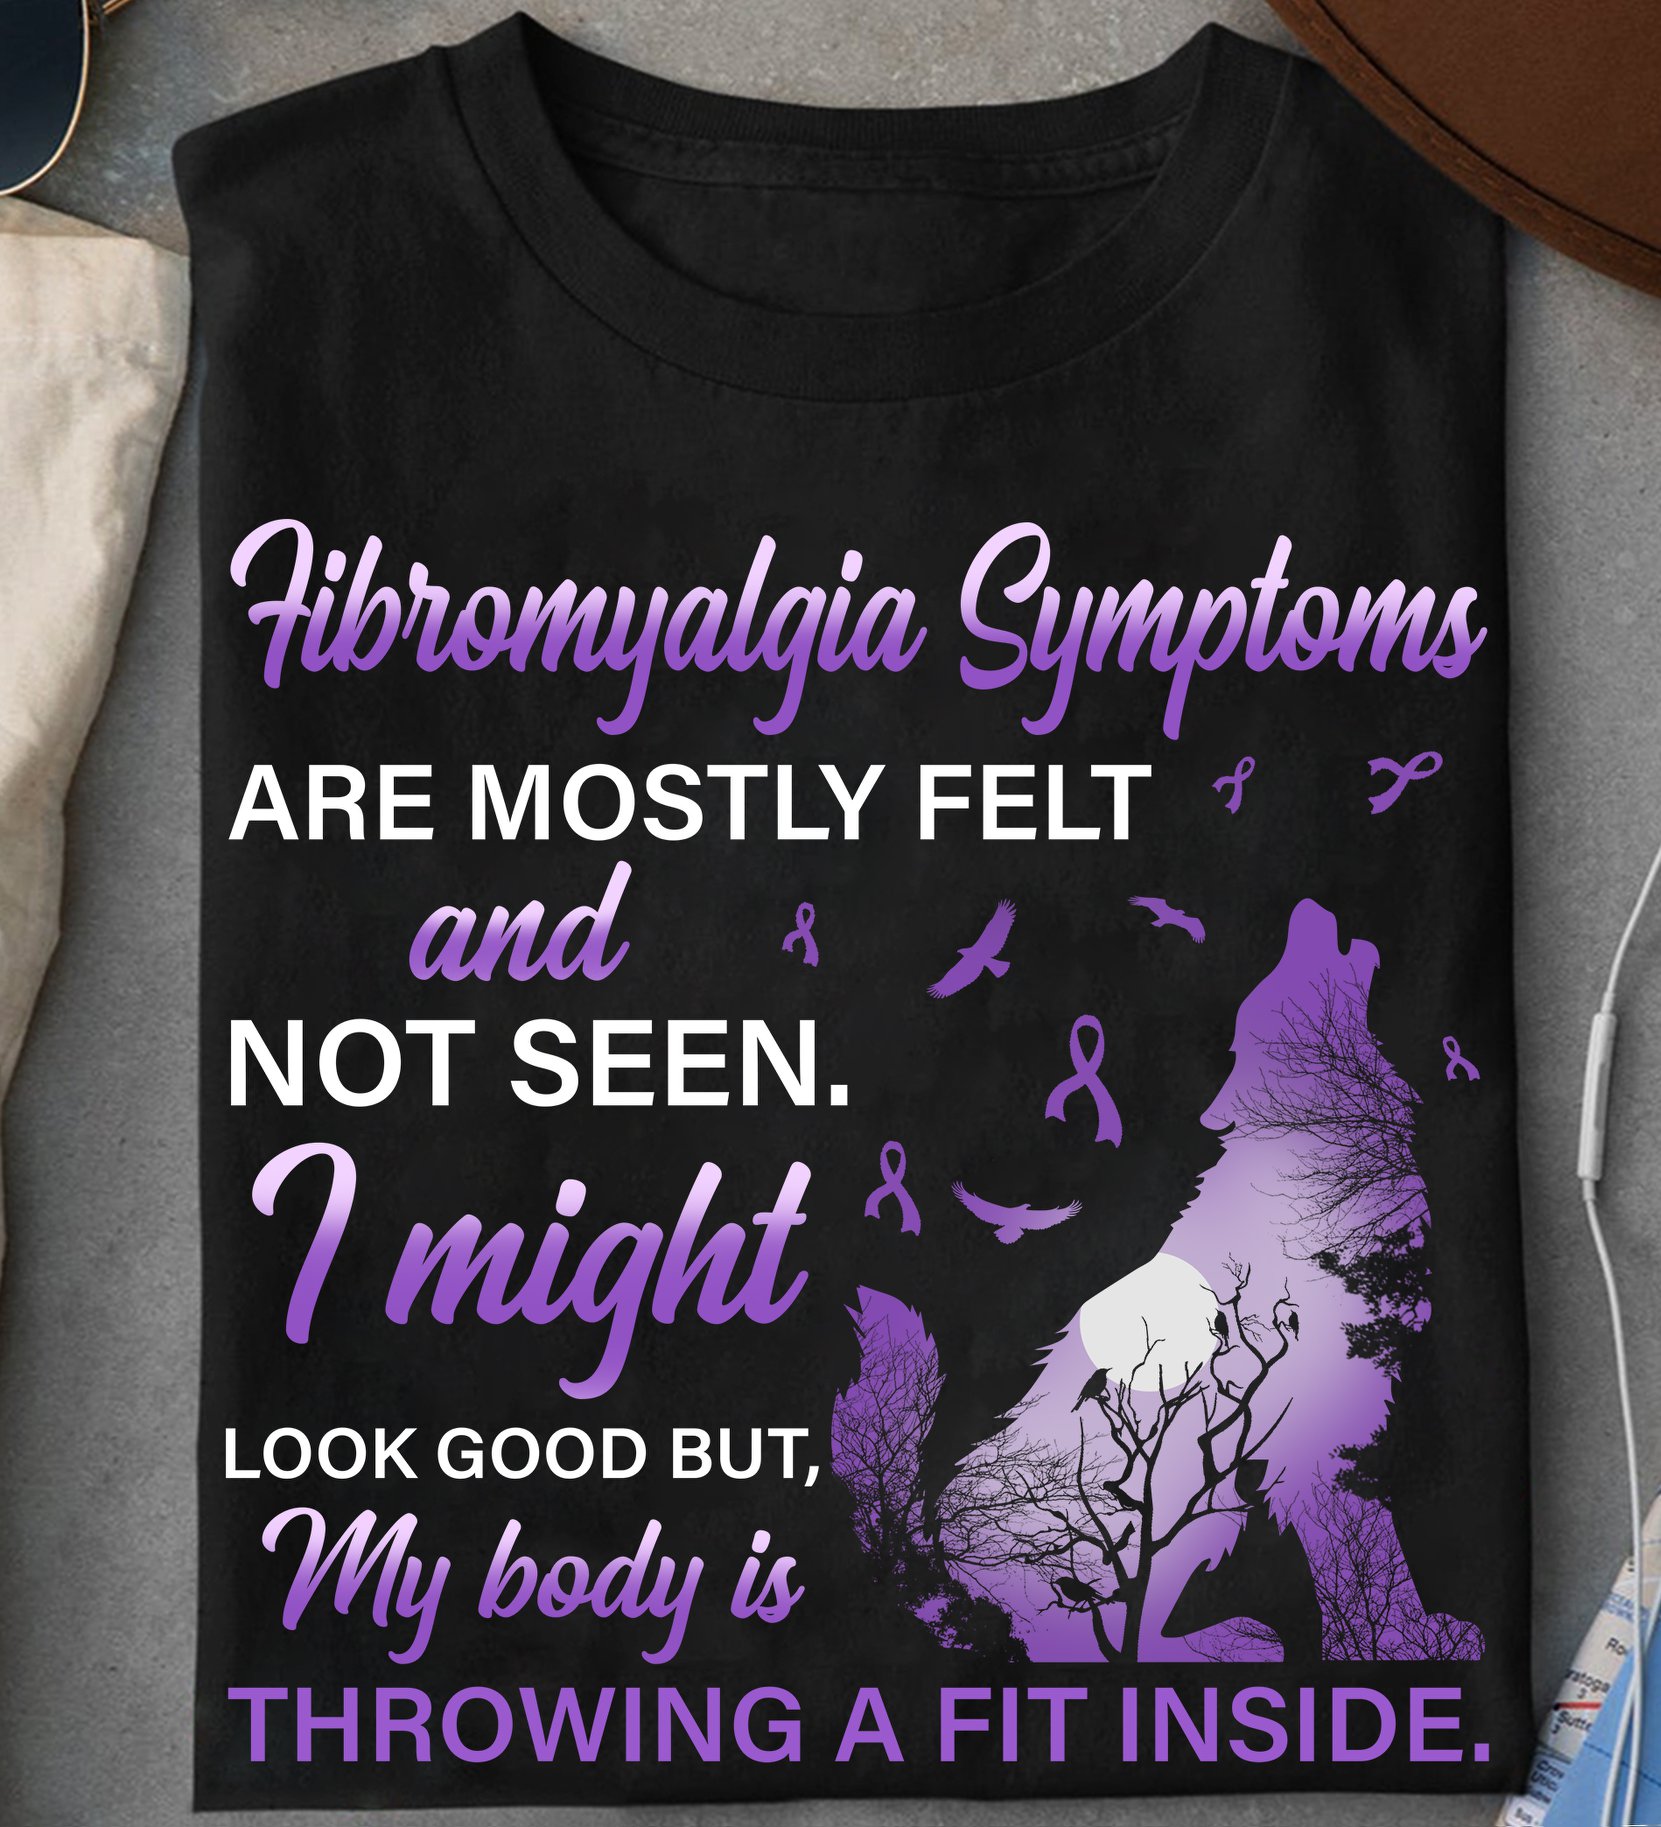 Fibromyalgia symptoms are mostly felt and not seen